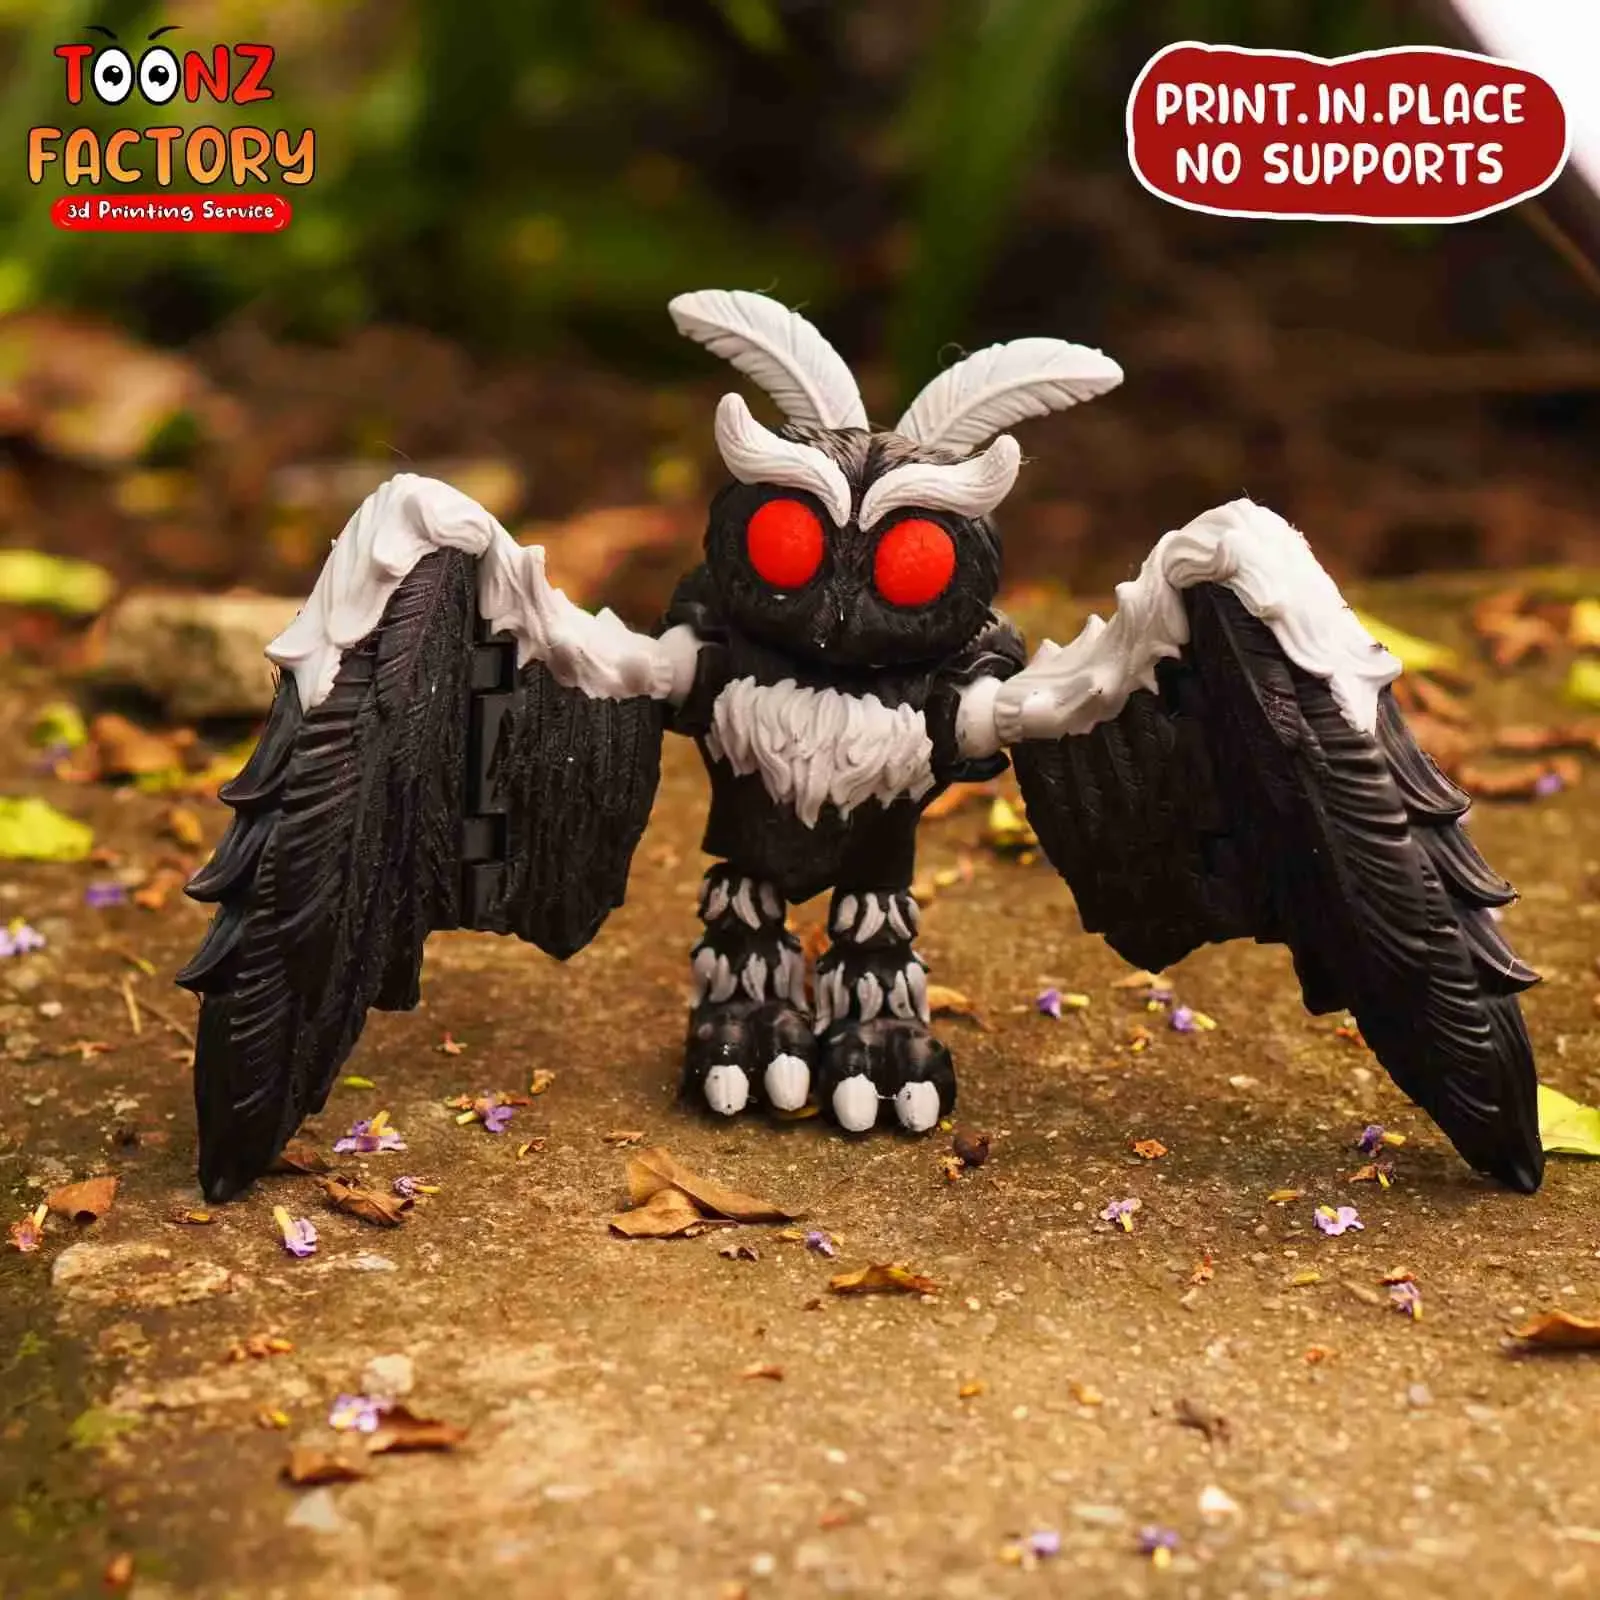 PRINT-IN-PLACE FLEXI MOTHMAN ARTICULATED